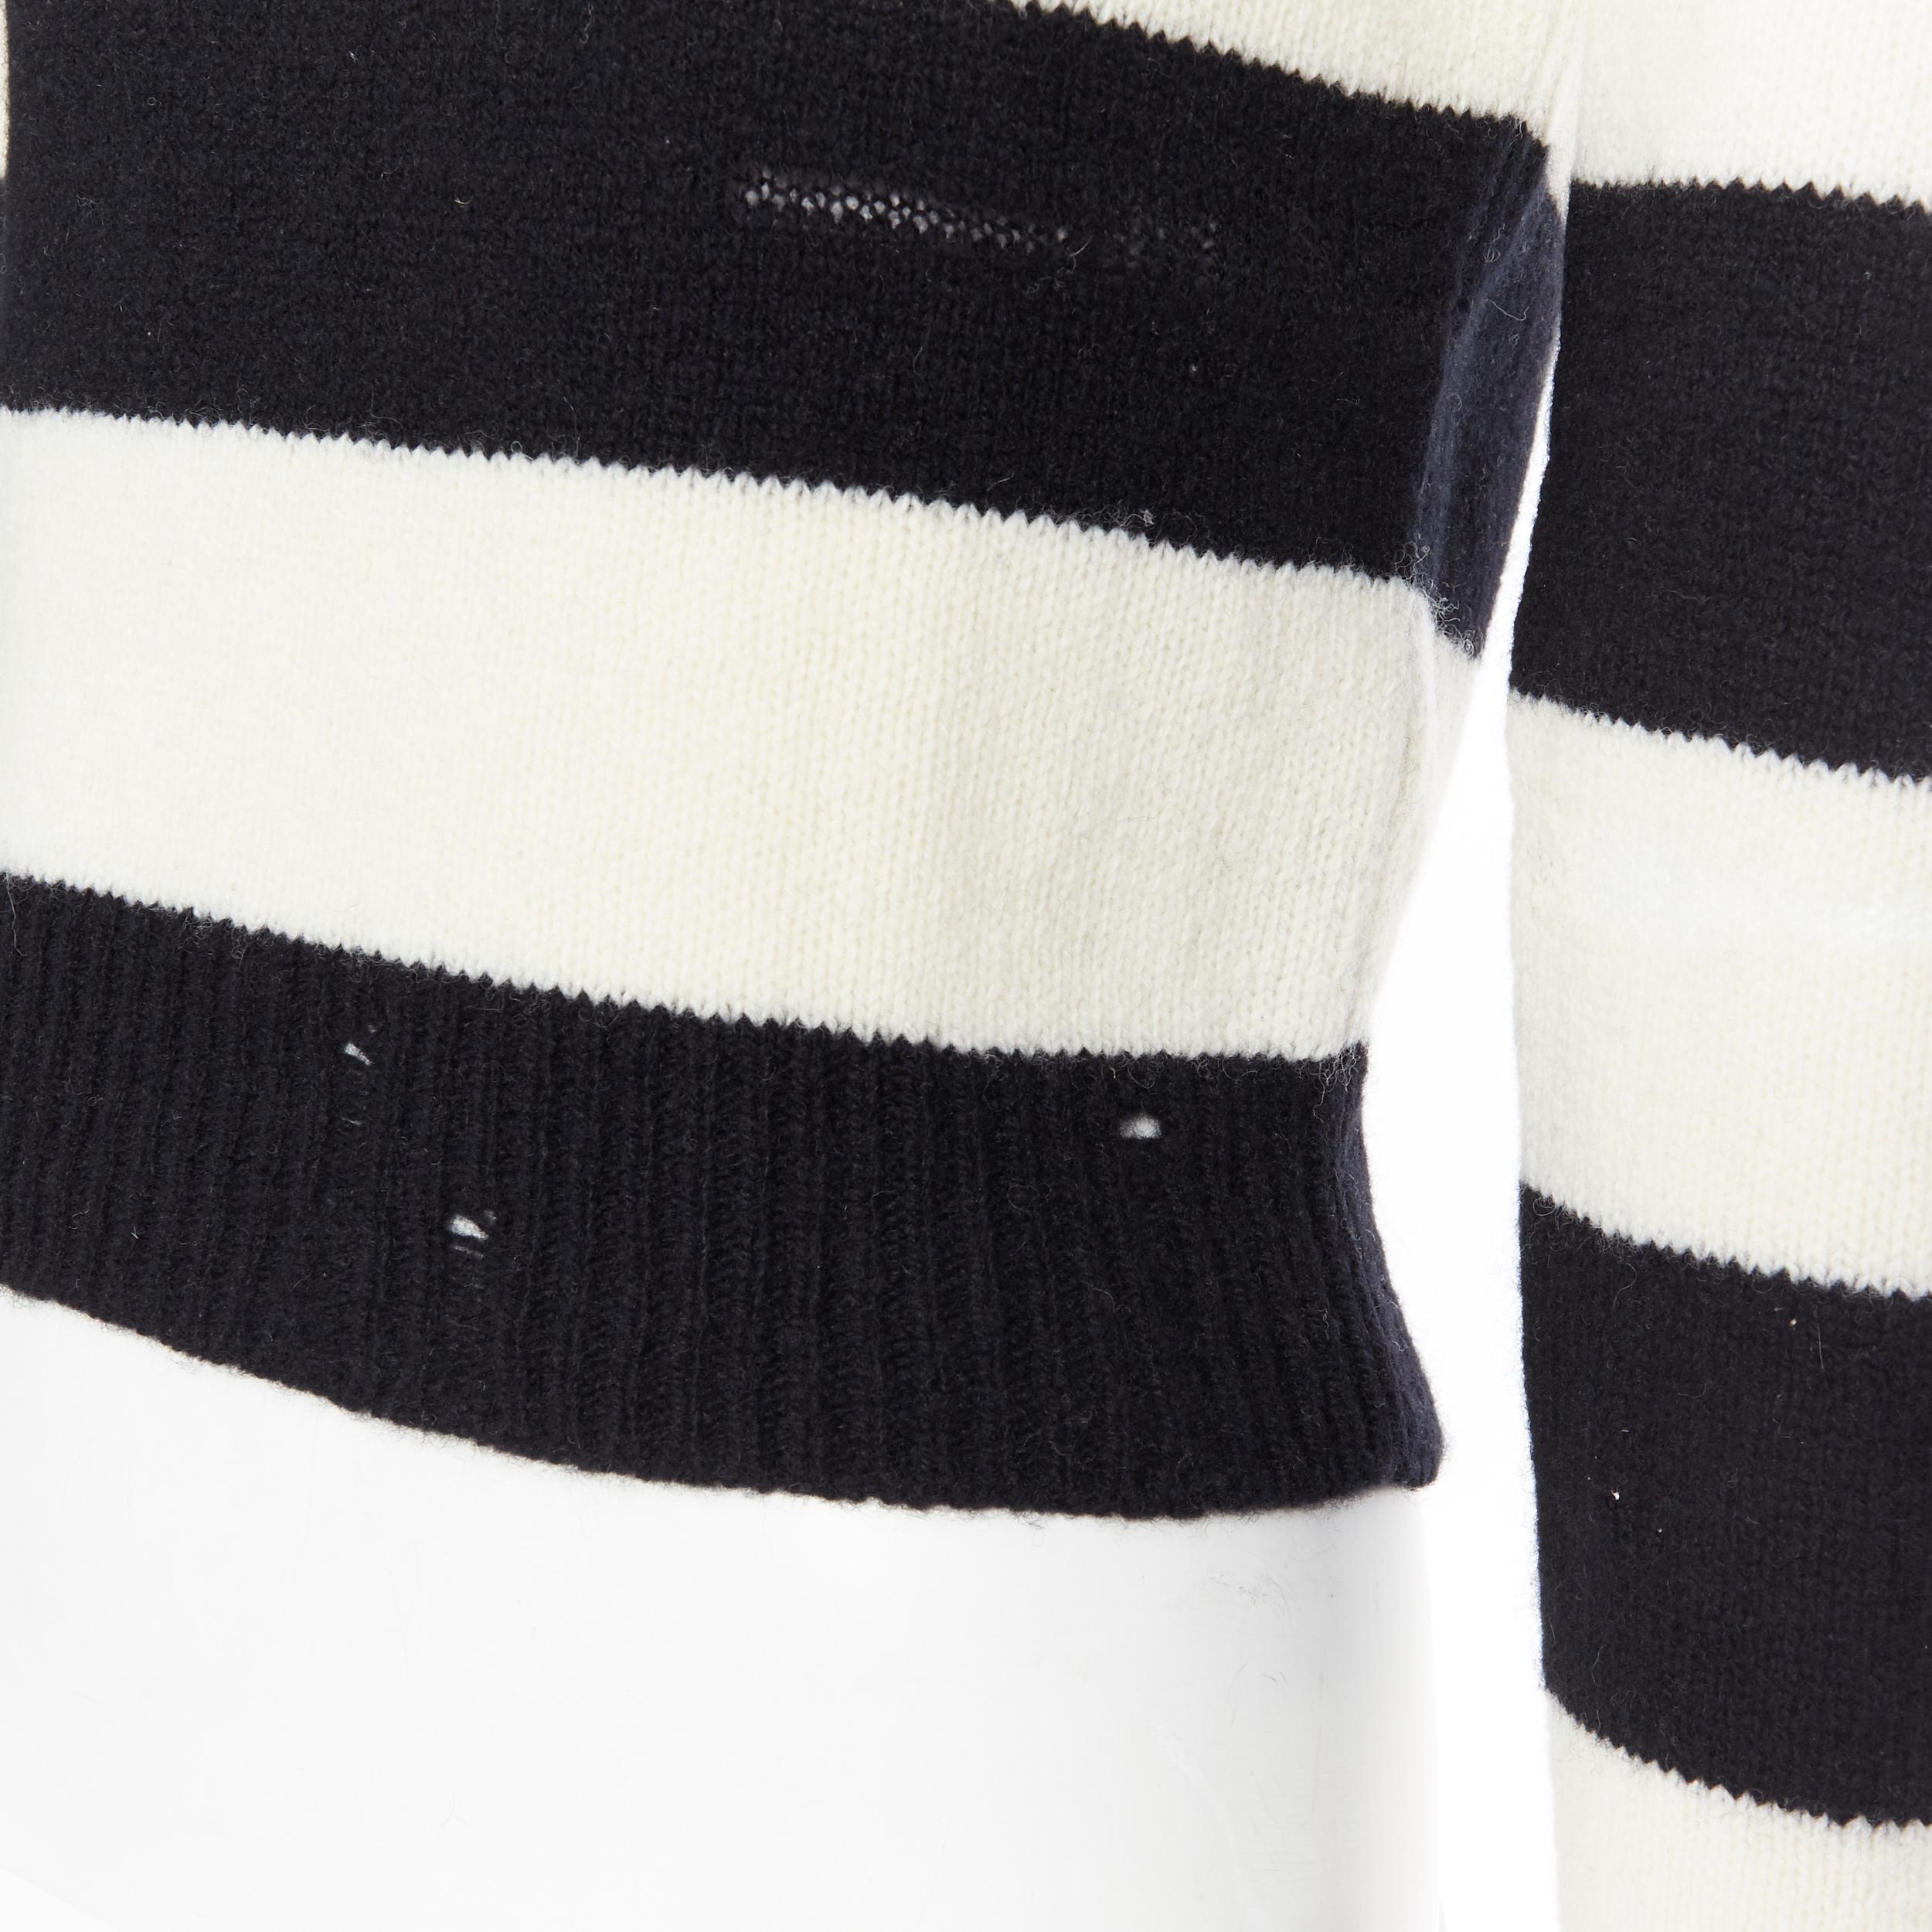 SAINT LAURENT 2015 black white striped distressed holey knit sweater top XS